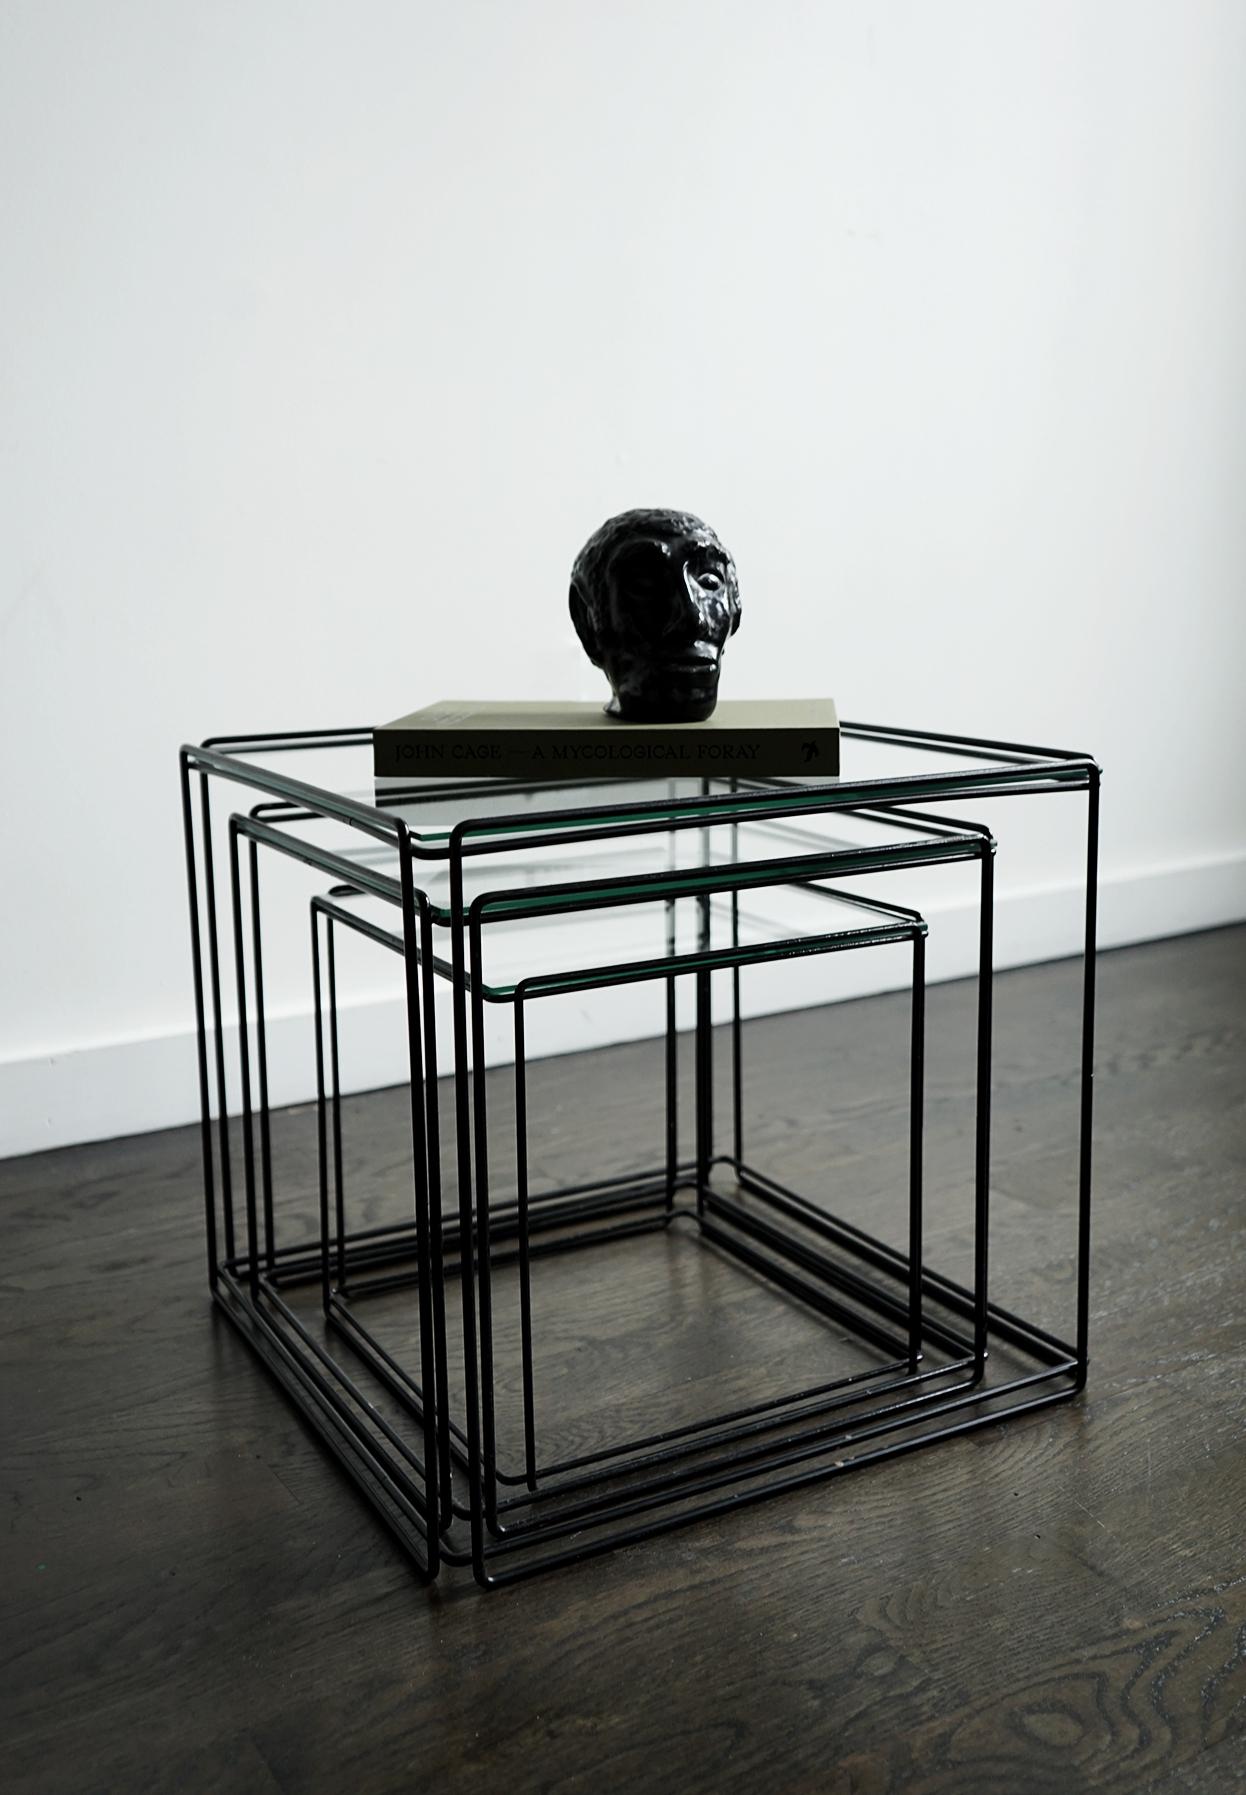 This nest of three Isocele nesting tables originates from France and was manufactured in the 1970s by Arrow. They have a black wire steel frame with glass on top. Designed by Max Sauze and are in very good vintage condition. These Minimalistic